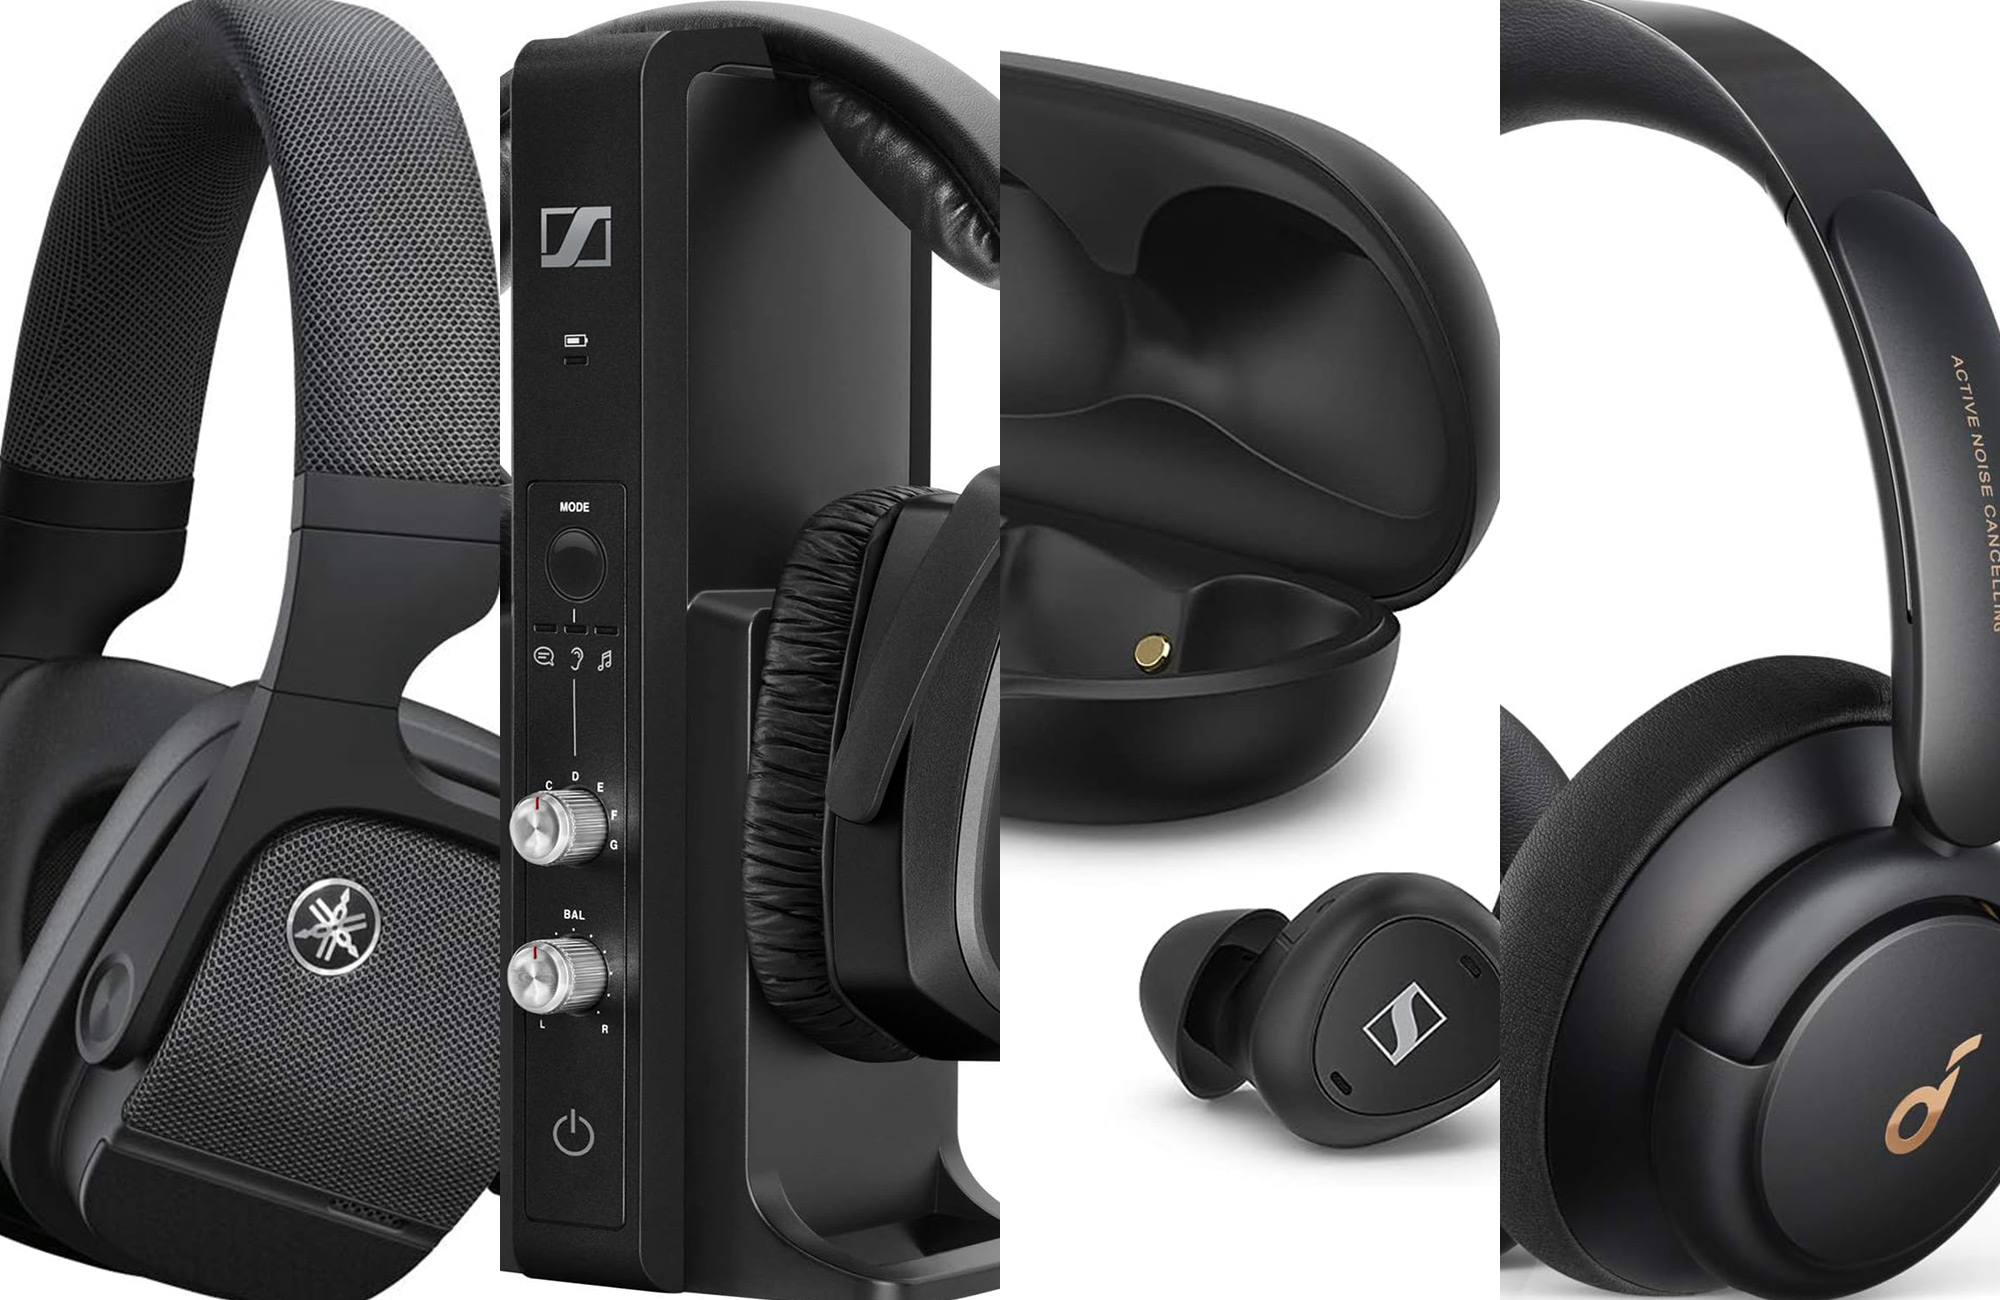 four of the best wireless headphones for TV sliced together against a white background